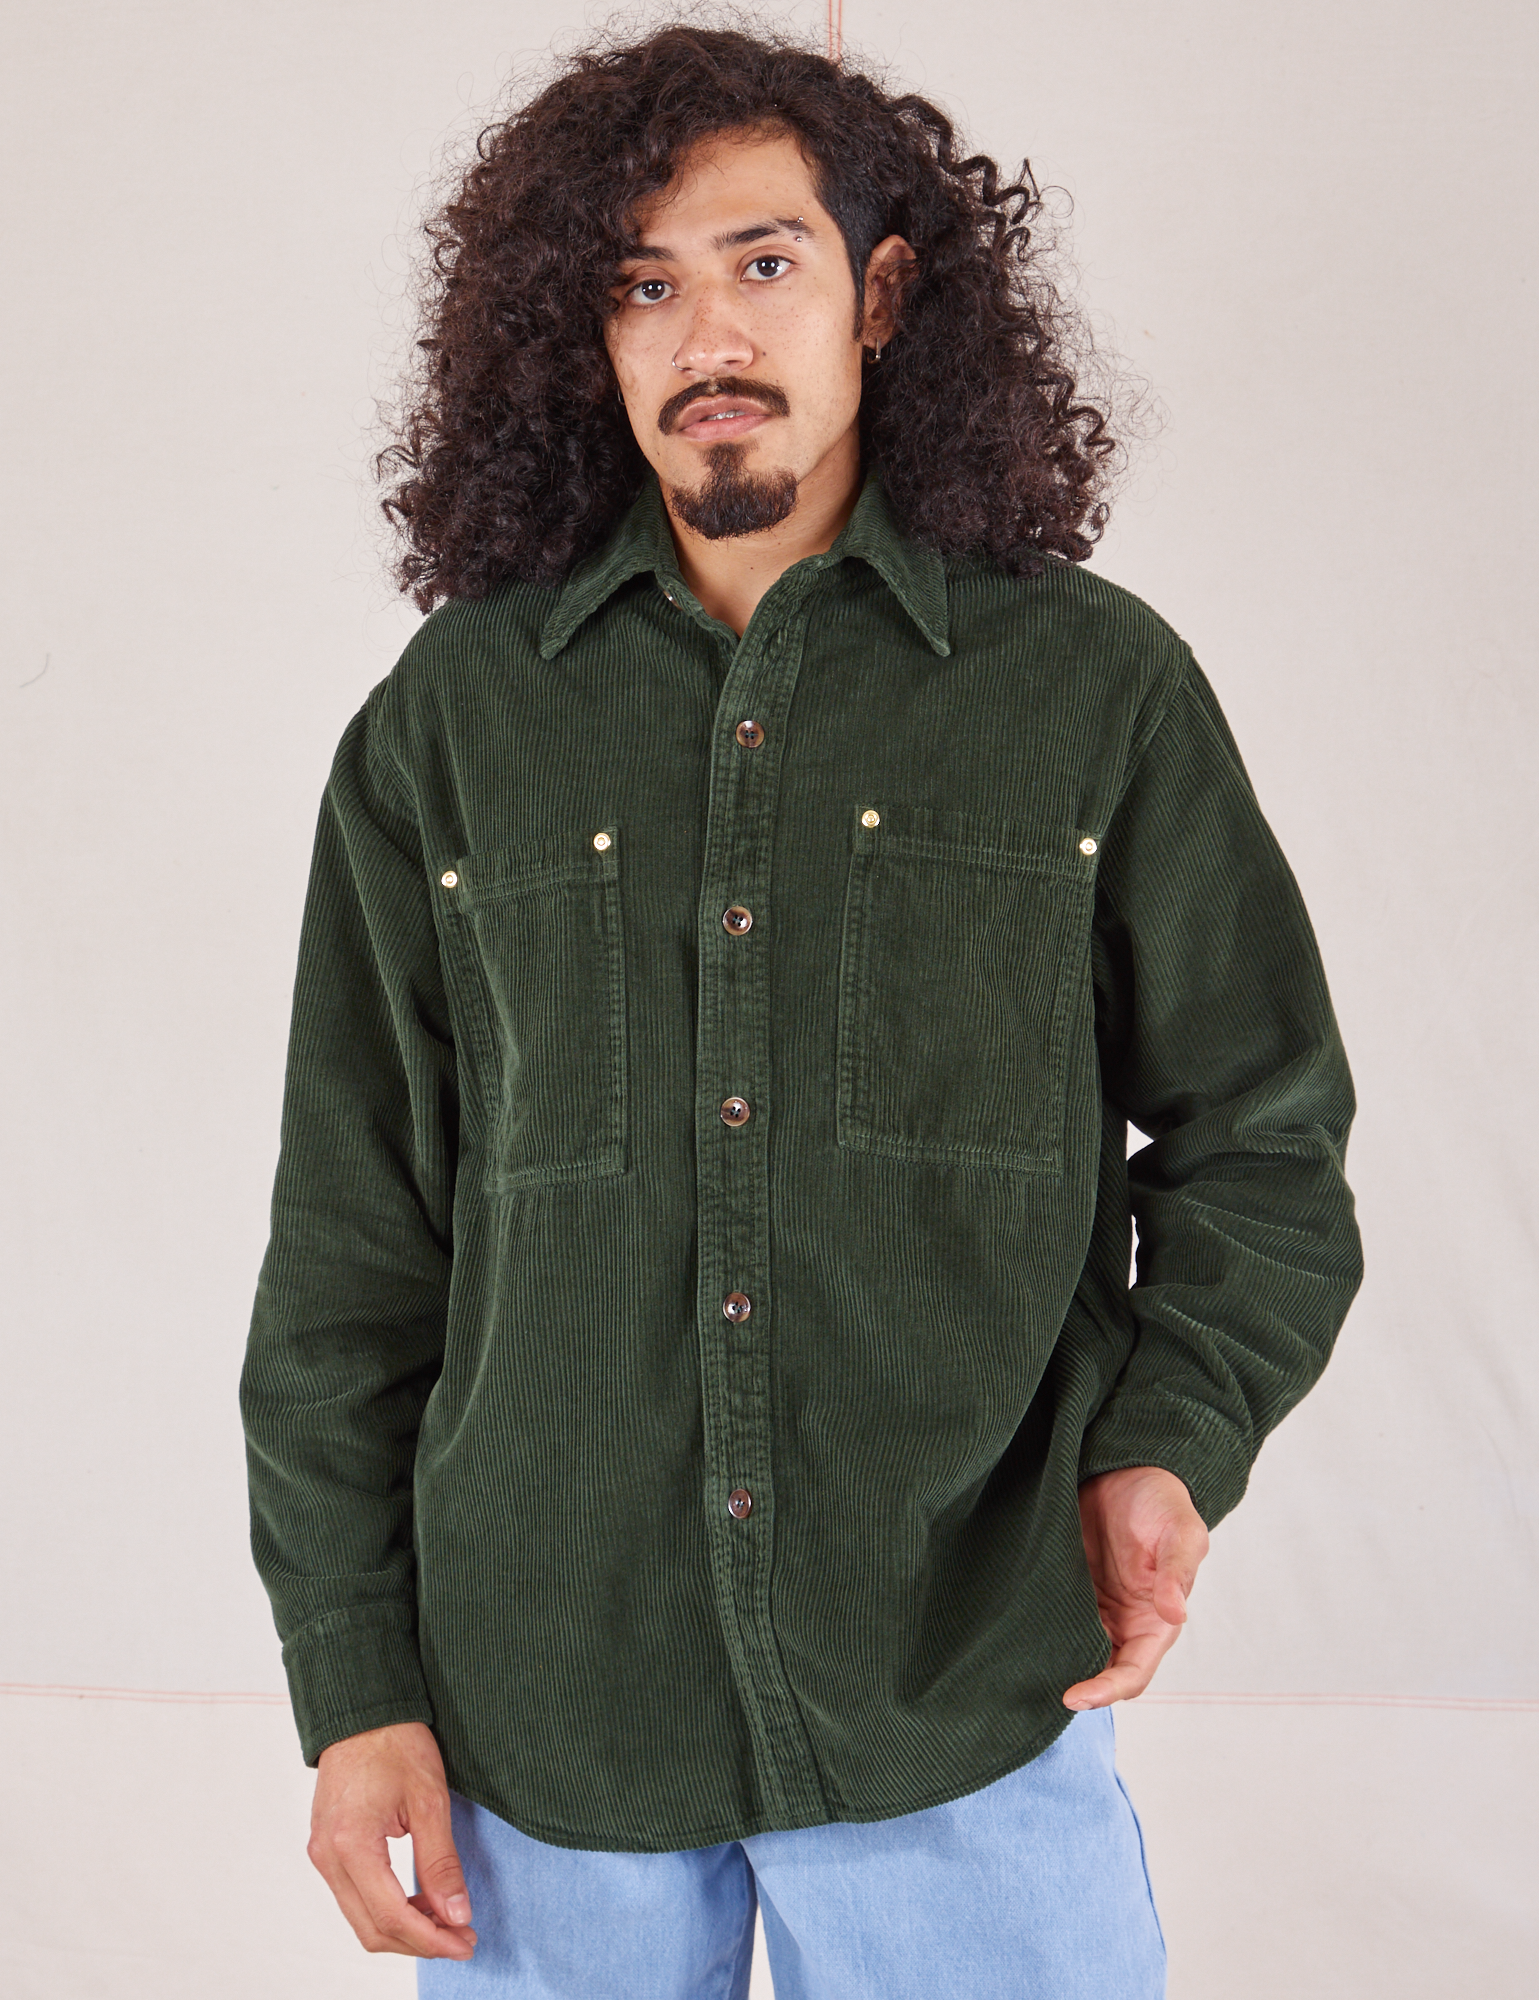 Jesse is 5&#39;8&quot; and wearing XS Corduroy Overshirt in Swamp Green